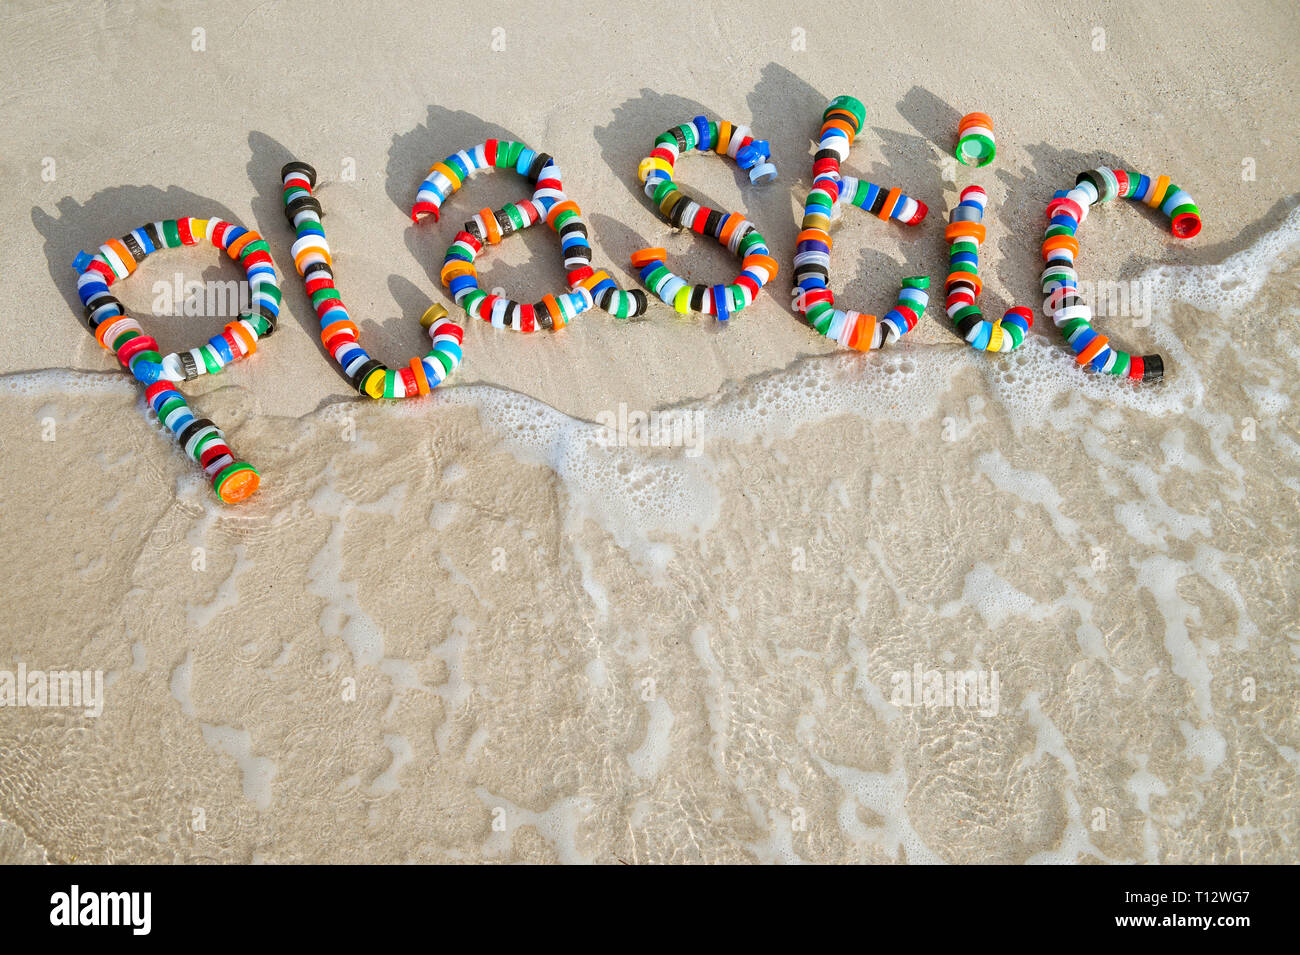 Plastic awareness message made from discarded bottle caps in a colorful word on the shore of a smooth beach Stock Photo